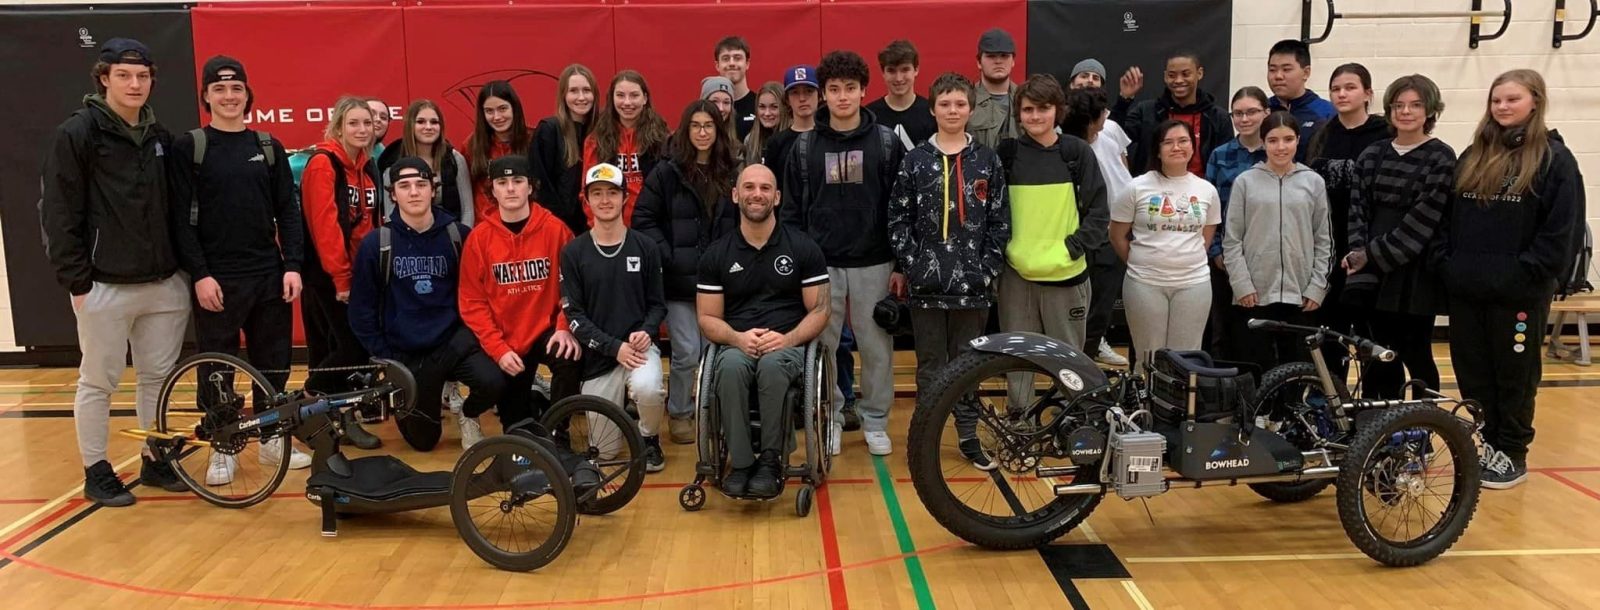 Joey Desjardins offers life lessons to students